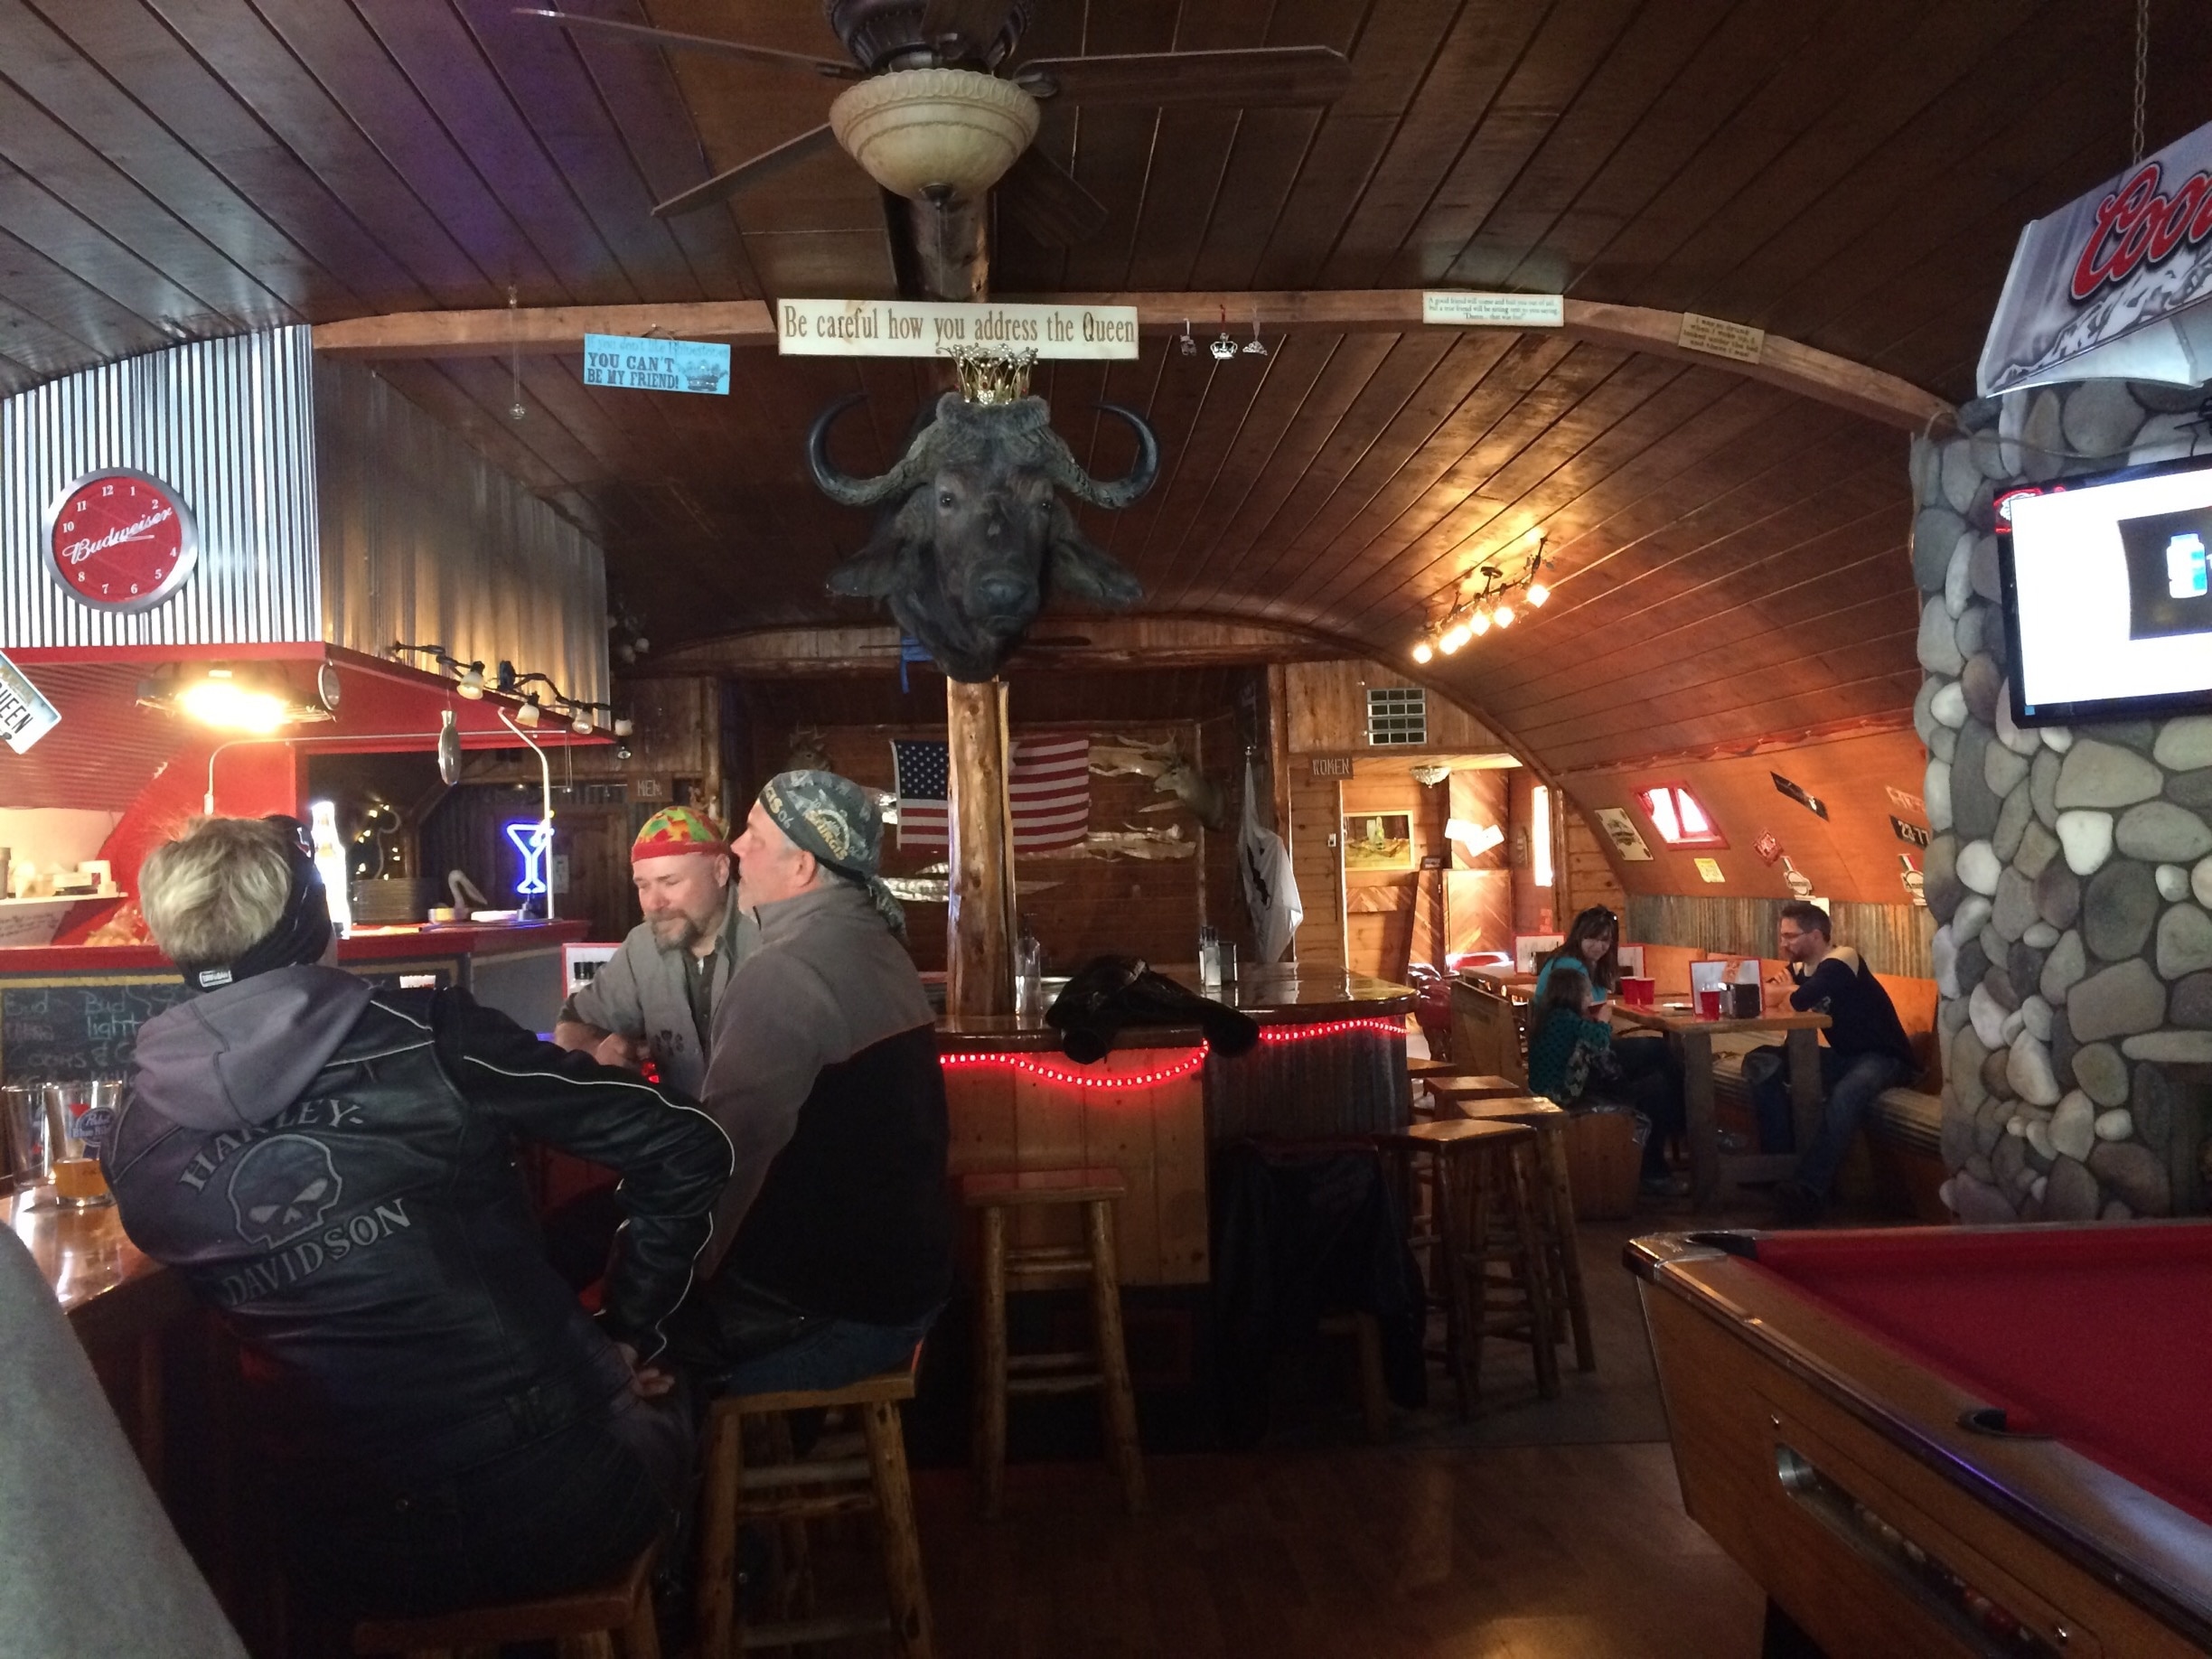 Cool old bar built in the 50s and recently redone in the Boulder River valley with a great cheesesteak. Sweet spot that I can't believe I've never been to! #roadtrip #montanamoment